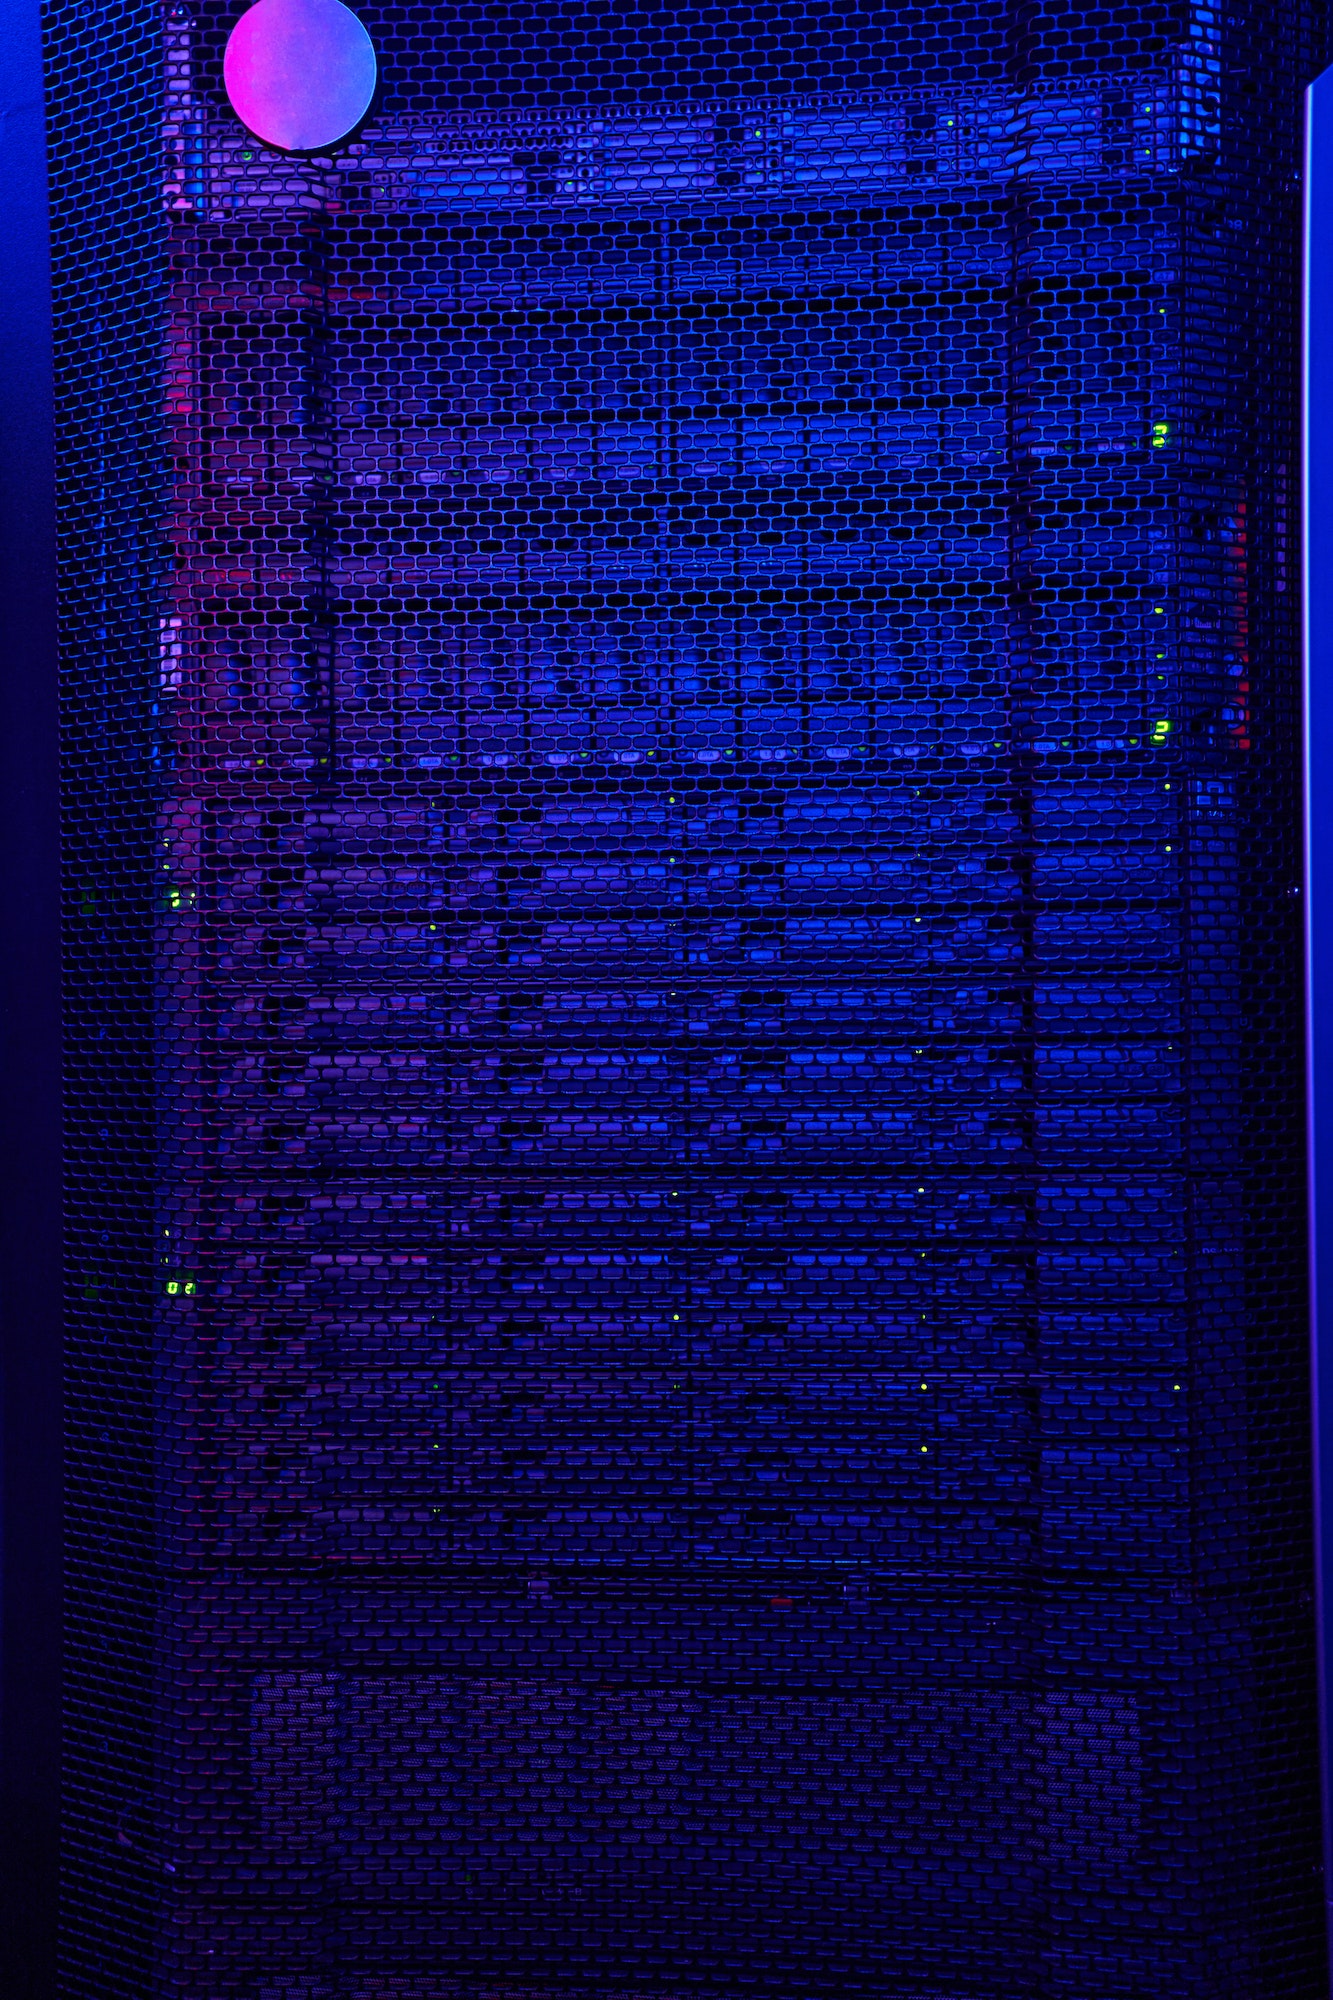 Picture of storage server with many HDD disks inside rack in tech place